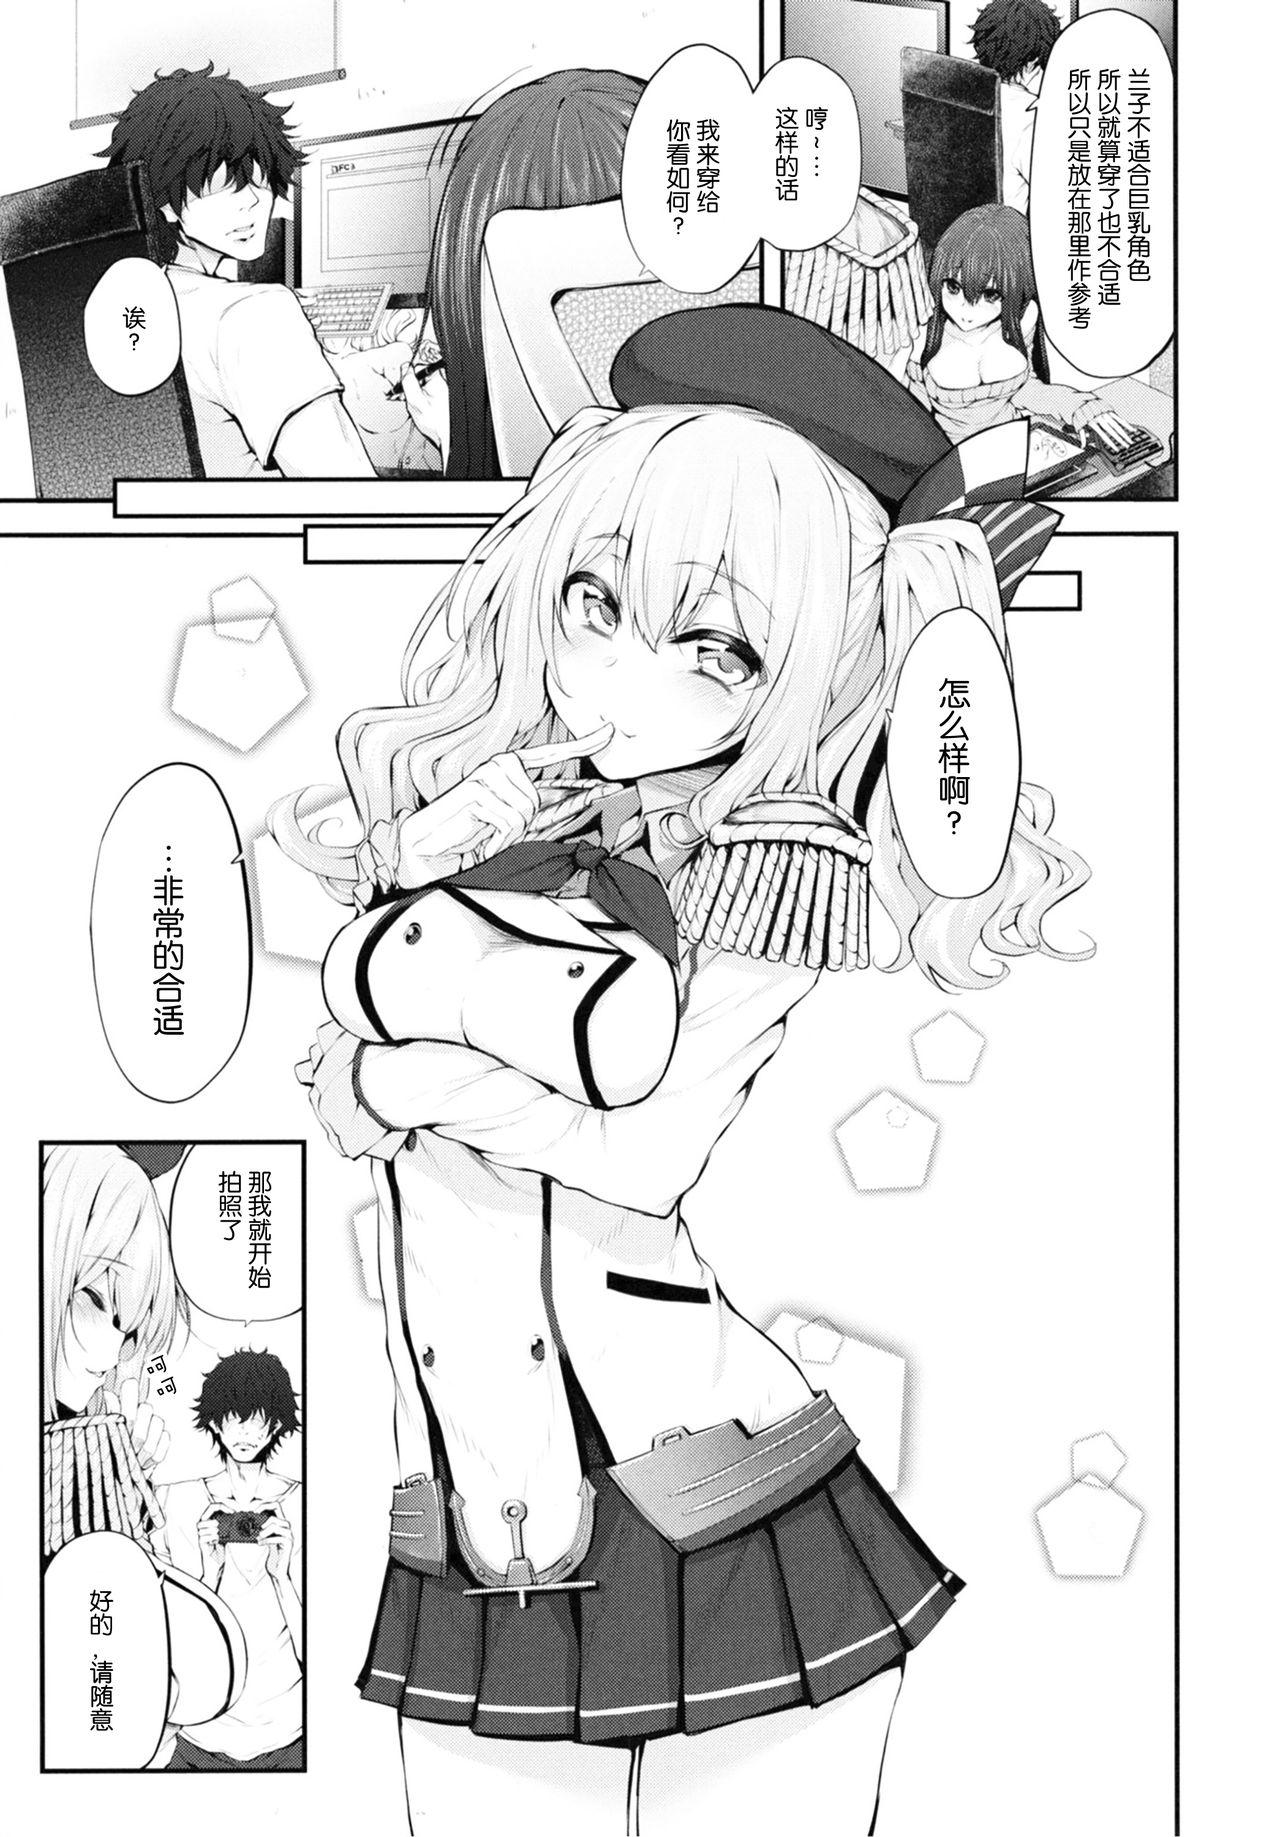 Hermana COSBITCH! Marked-girls Origin Vol. 1 - Kantai collection Stepsiblings - Page 9